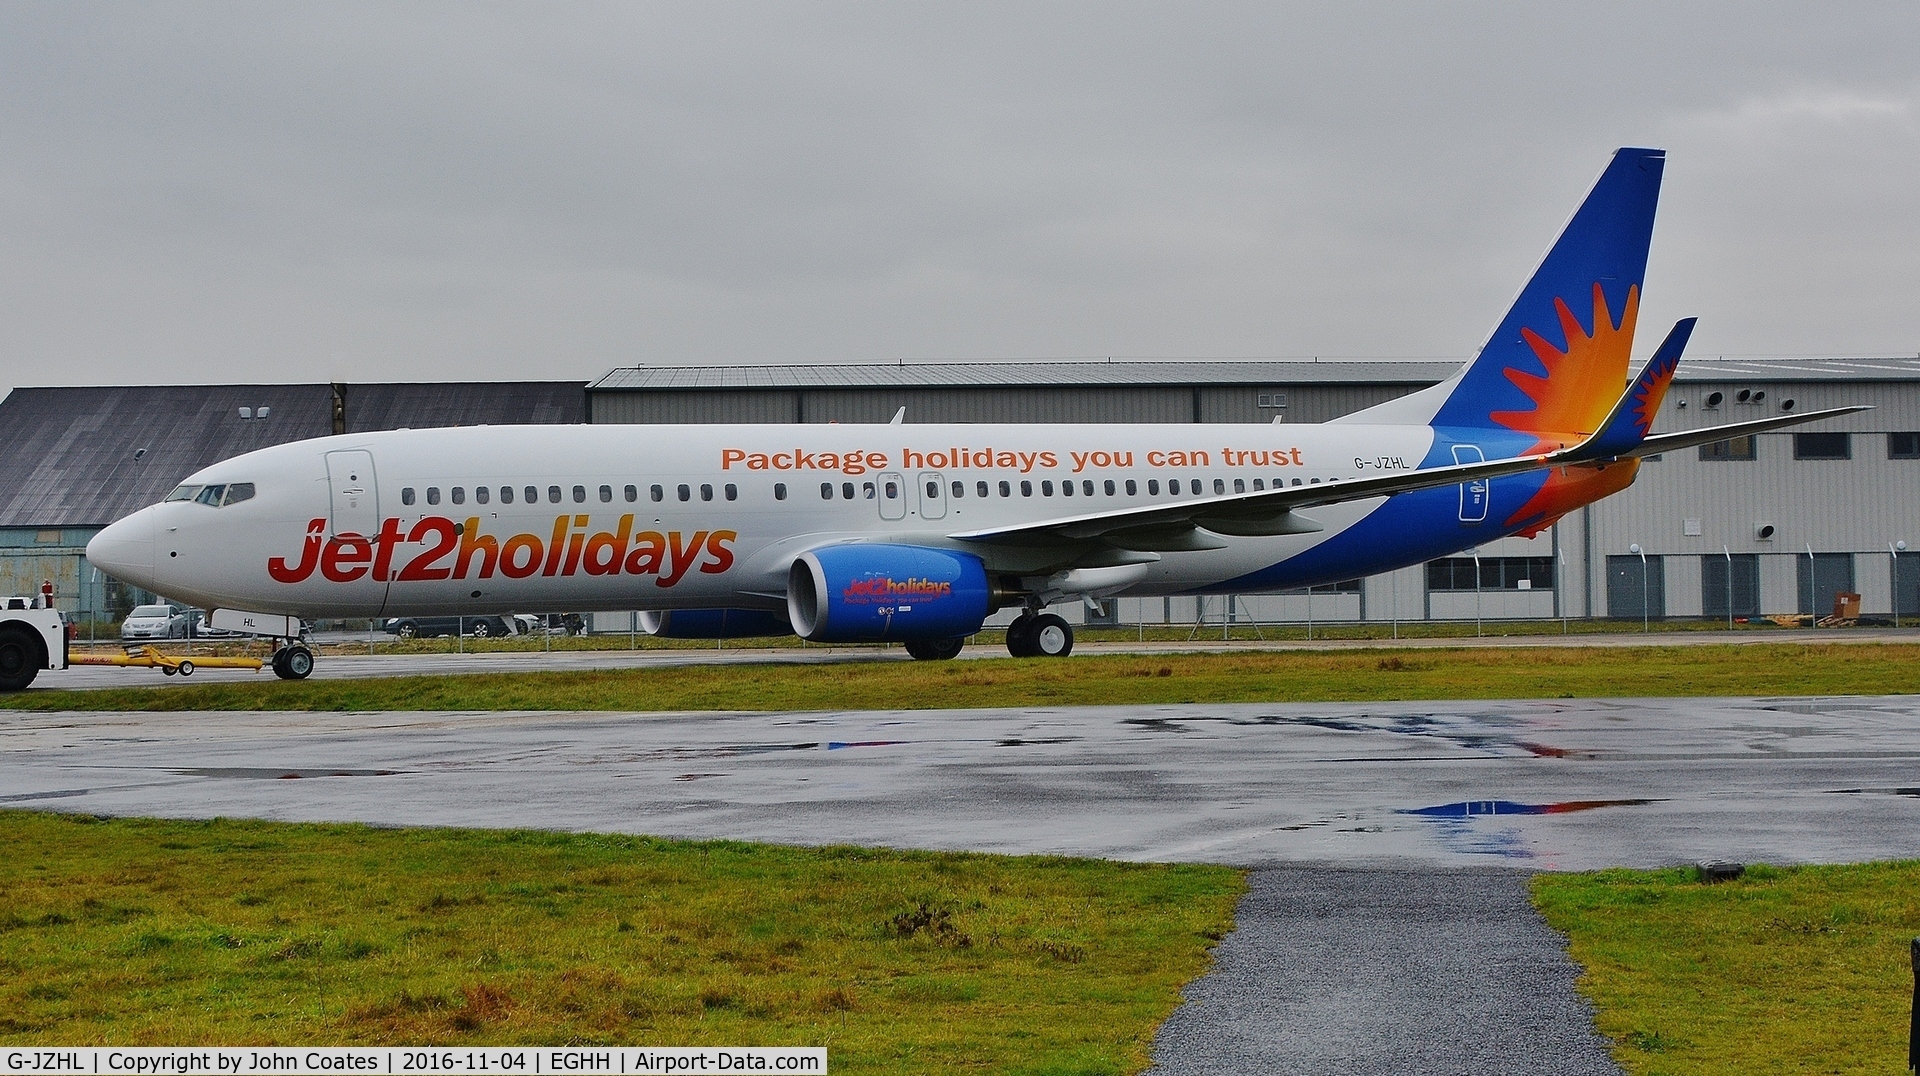 G-JZHL, 2016 Boeing 737-8MG C/N 63568, Exits paintshop in its new livery